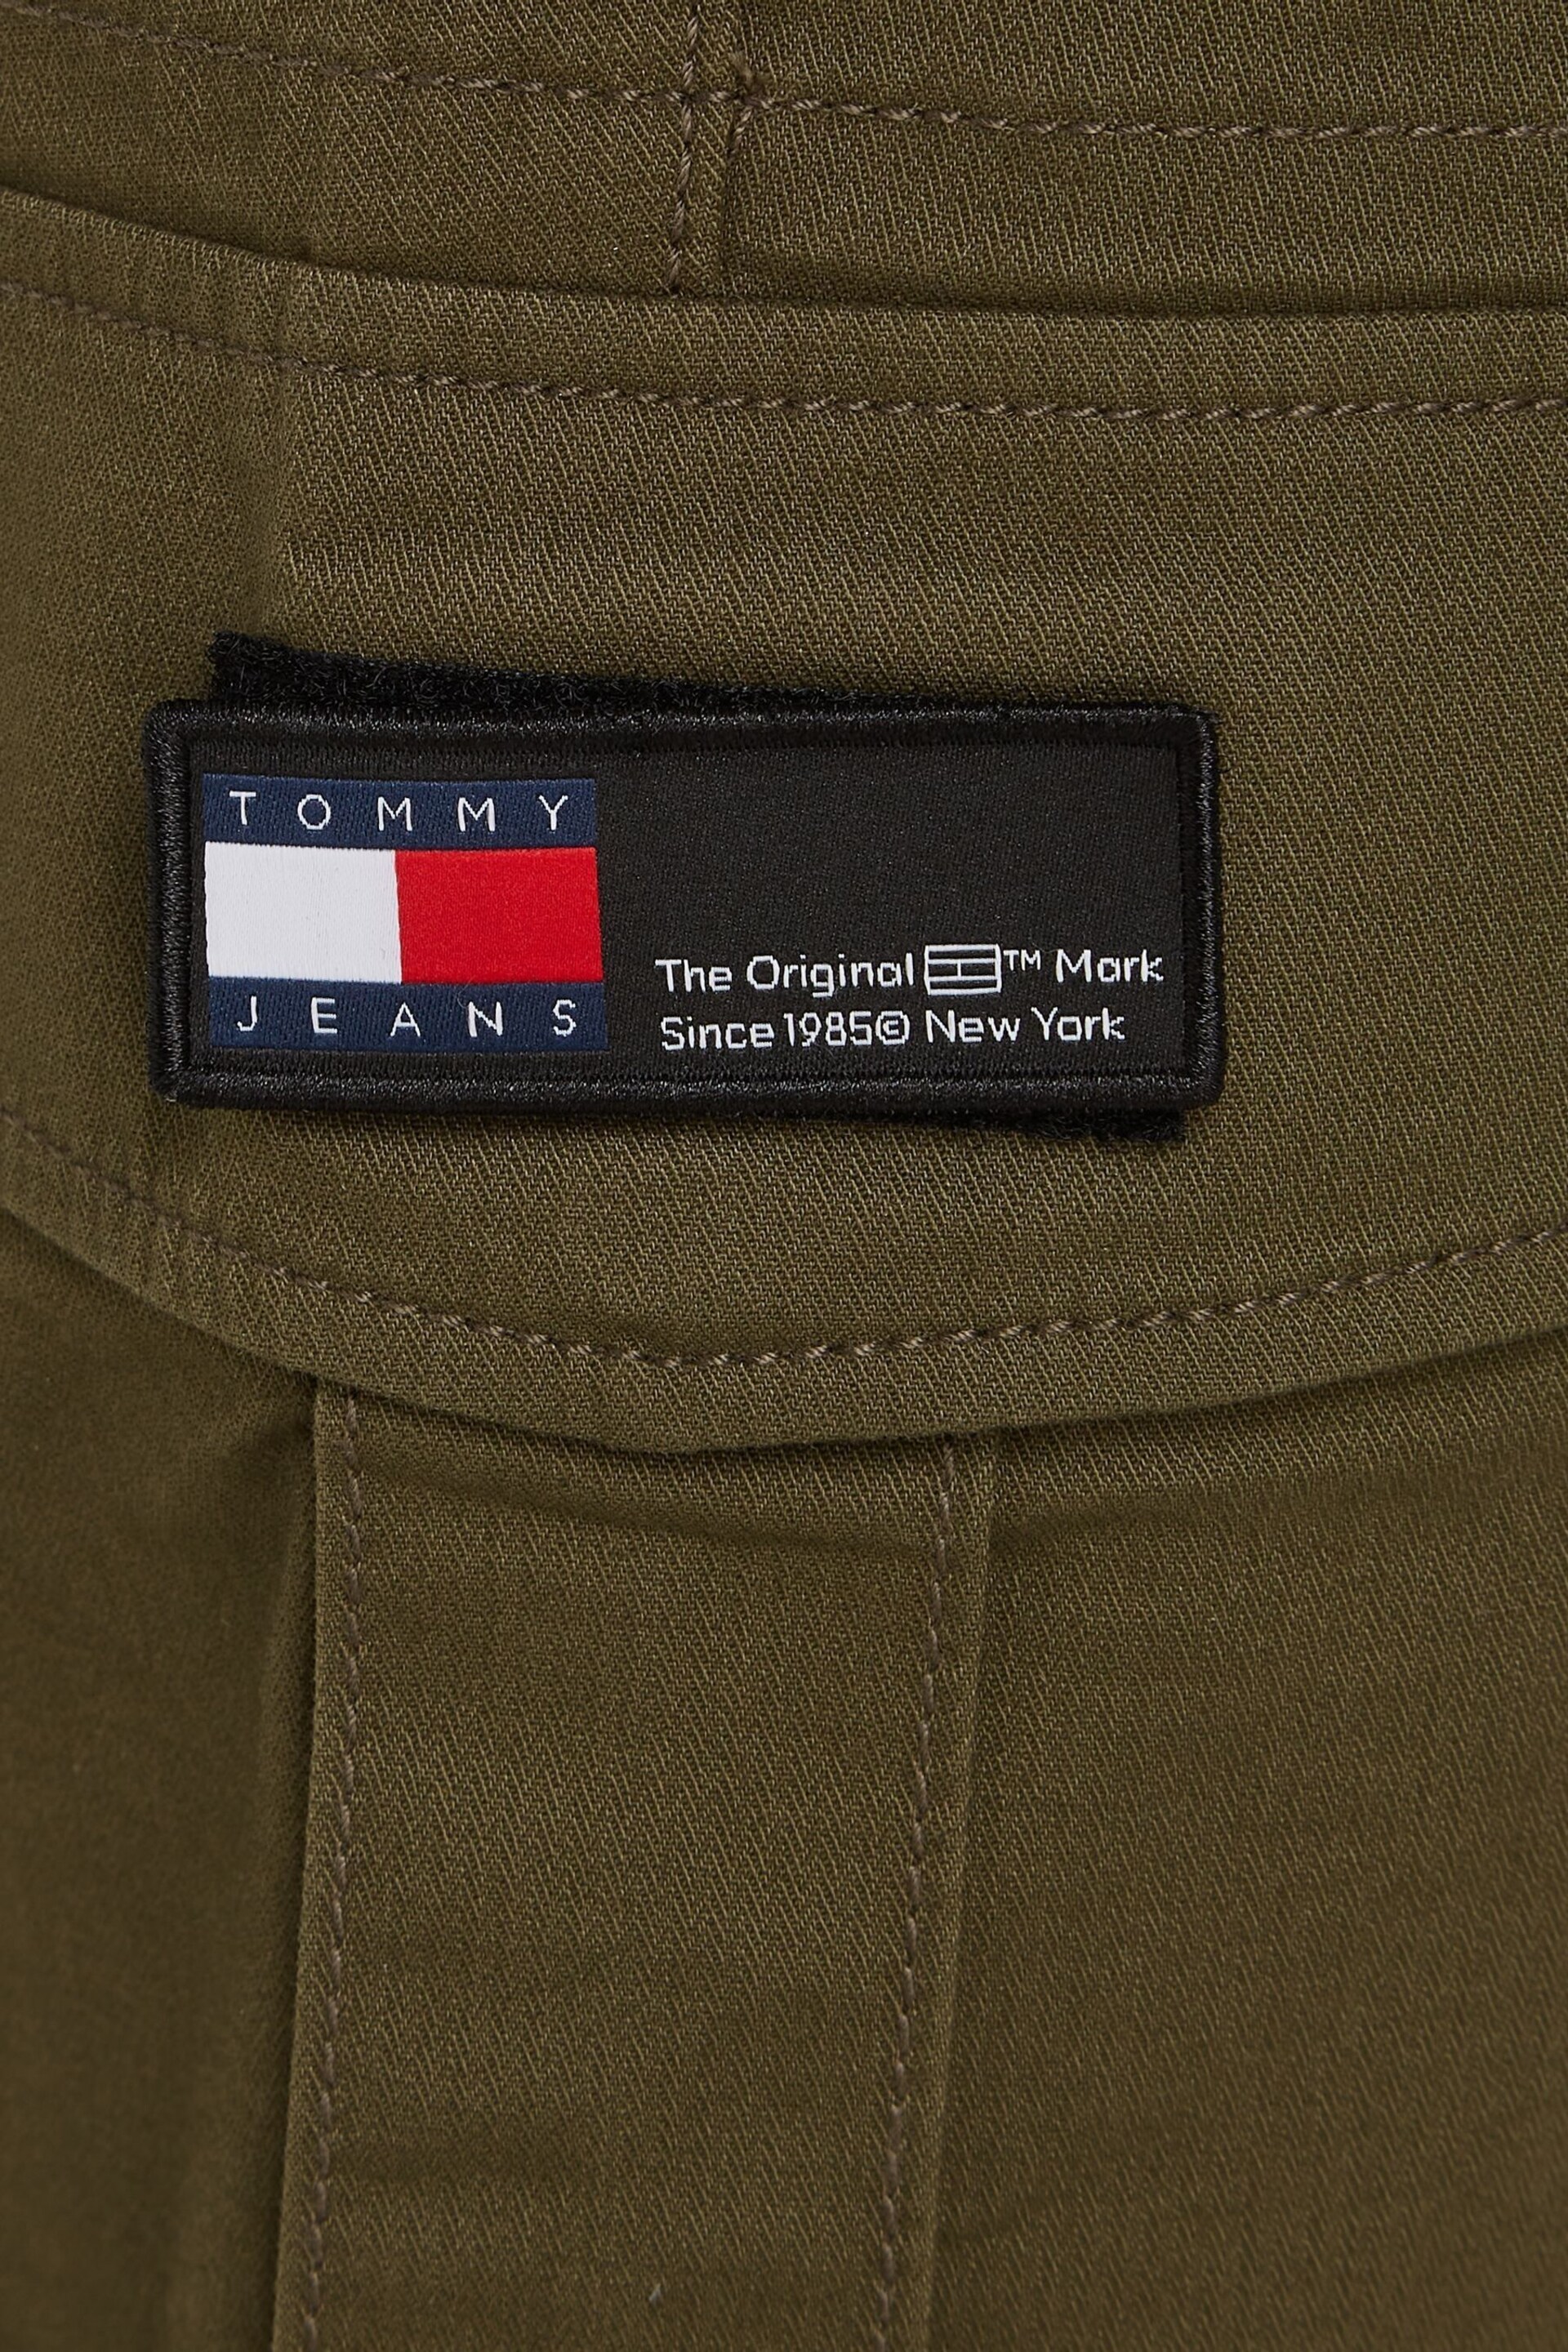 Tommy Jeans Austin Cargo Trousers - Image 6 of 6